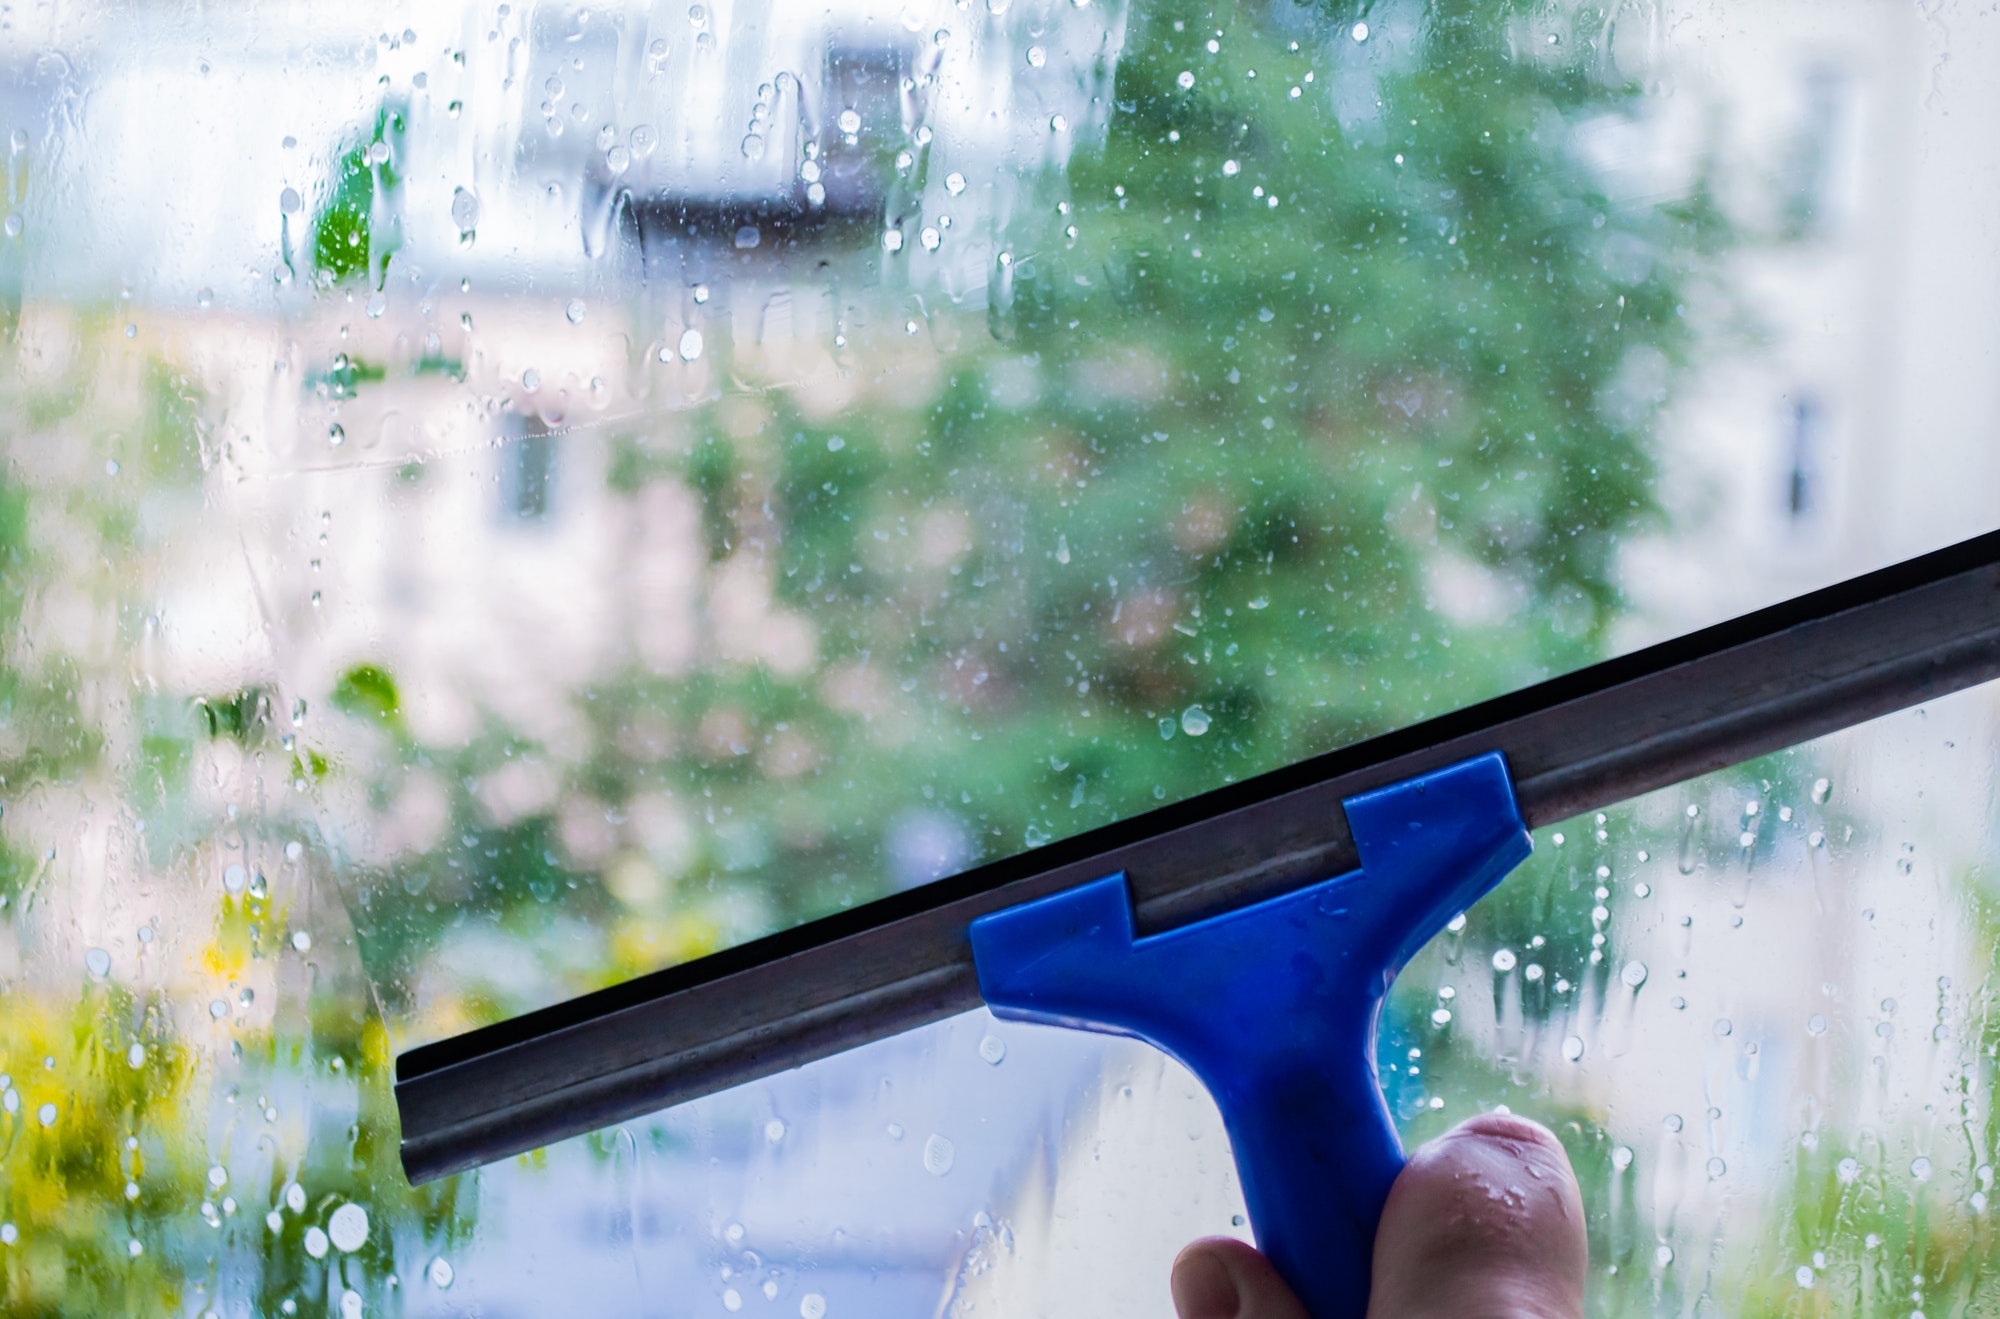 Window pane cleaning, housework with special squeegee. Outside the window blurred street